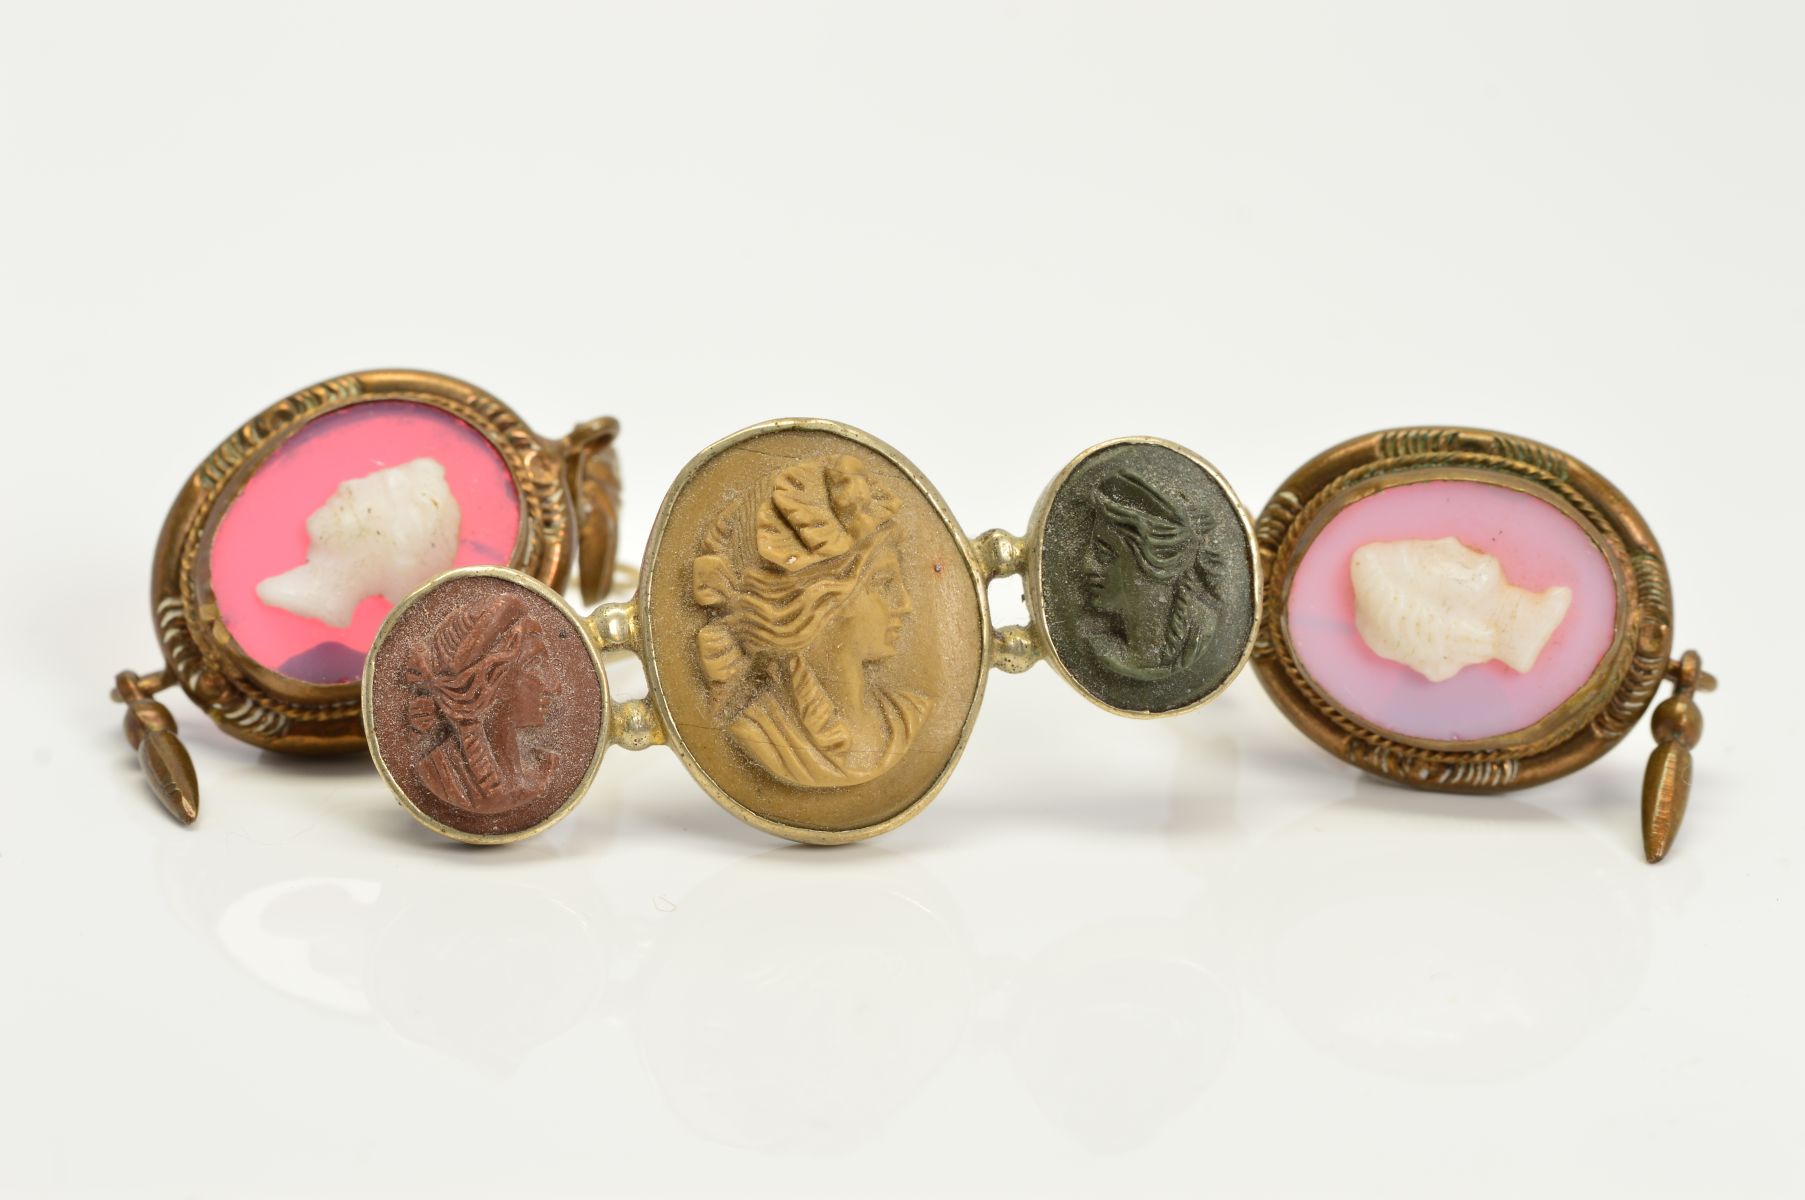 A VICTORIAN LAVA CAMEO BROOCH depicting three maidens in profile, pin and hook catch, together